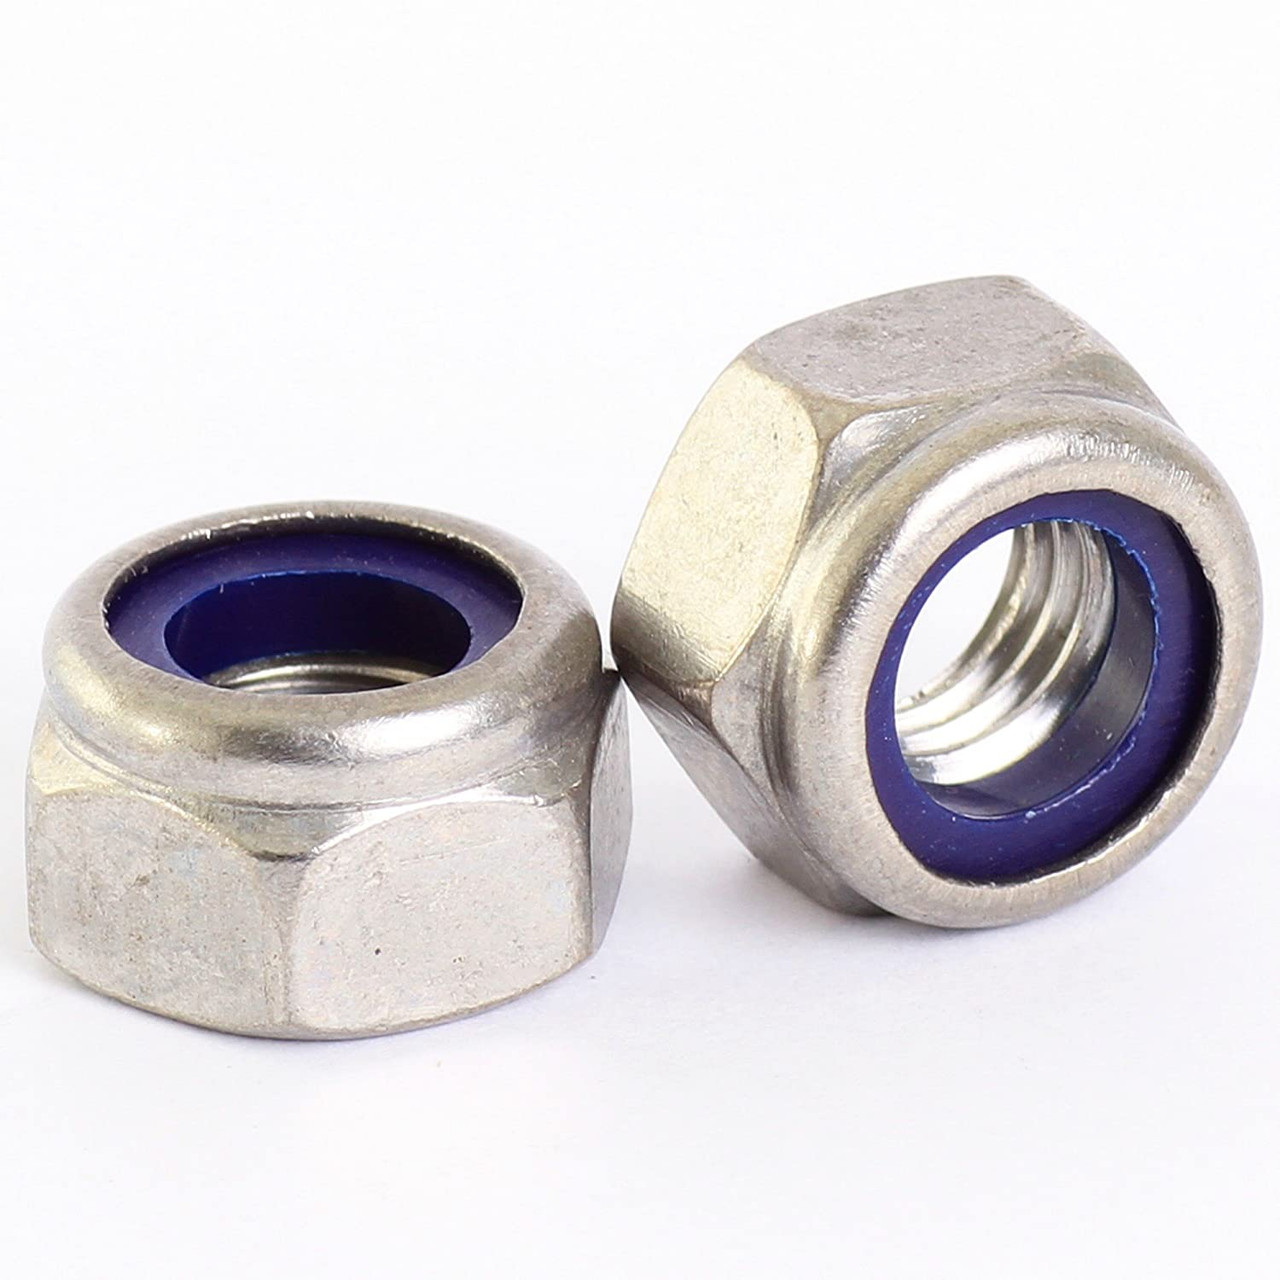 6mm A2 Stainless Steel Nylon Insert Nyloc Nylock Lock Nuts M6 X 1.0mm Pitch - 25